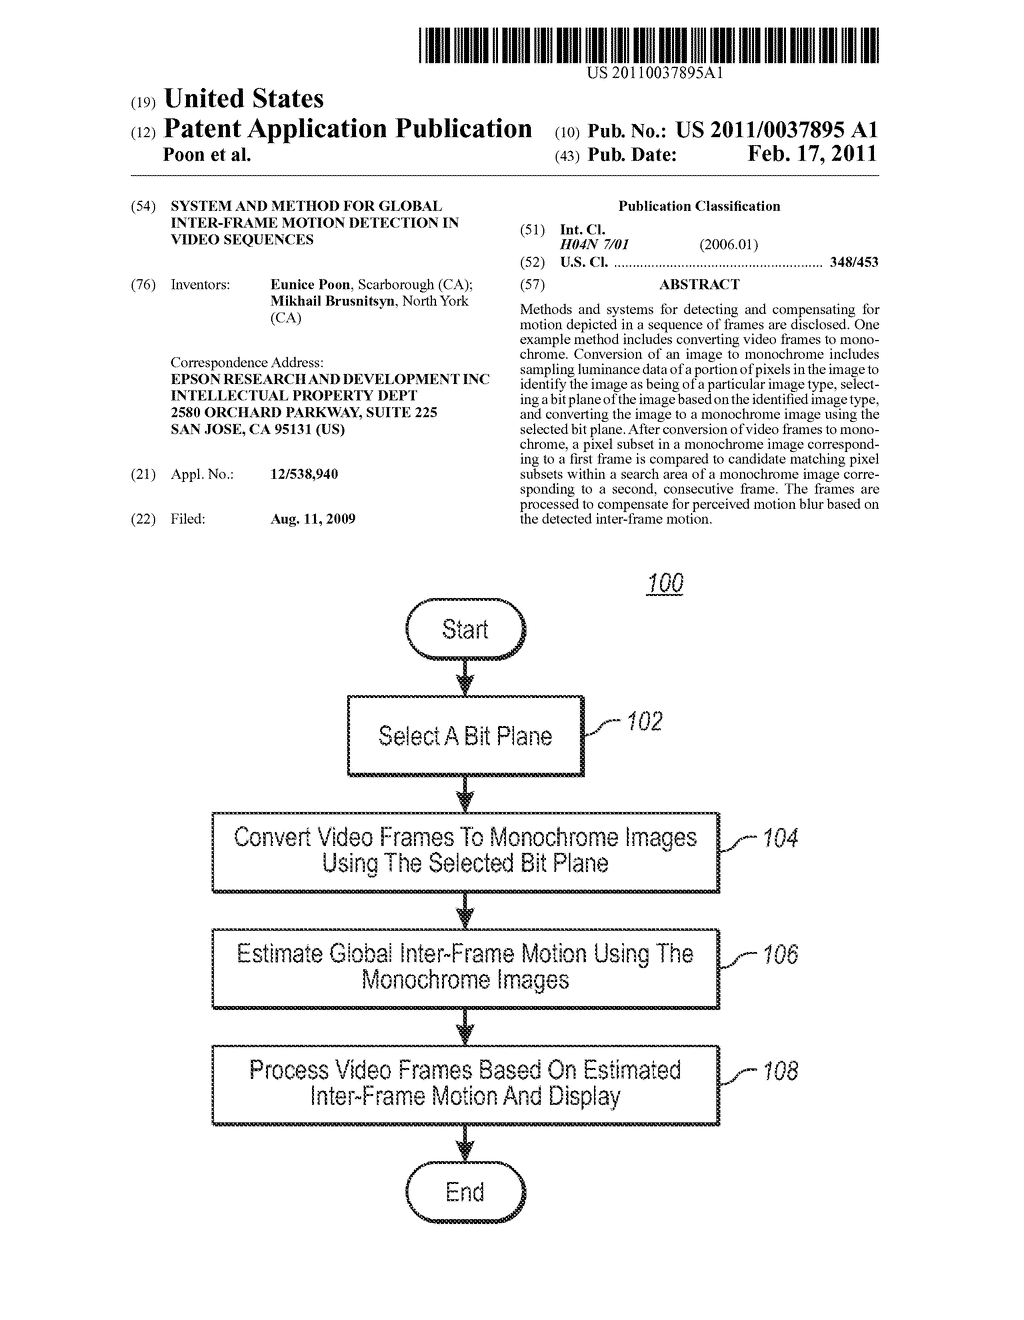 System And Method For Global Inter-Frame Motion Detection In Video Sequences - diagram, schematic, and image 01